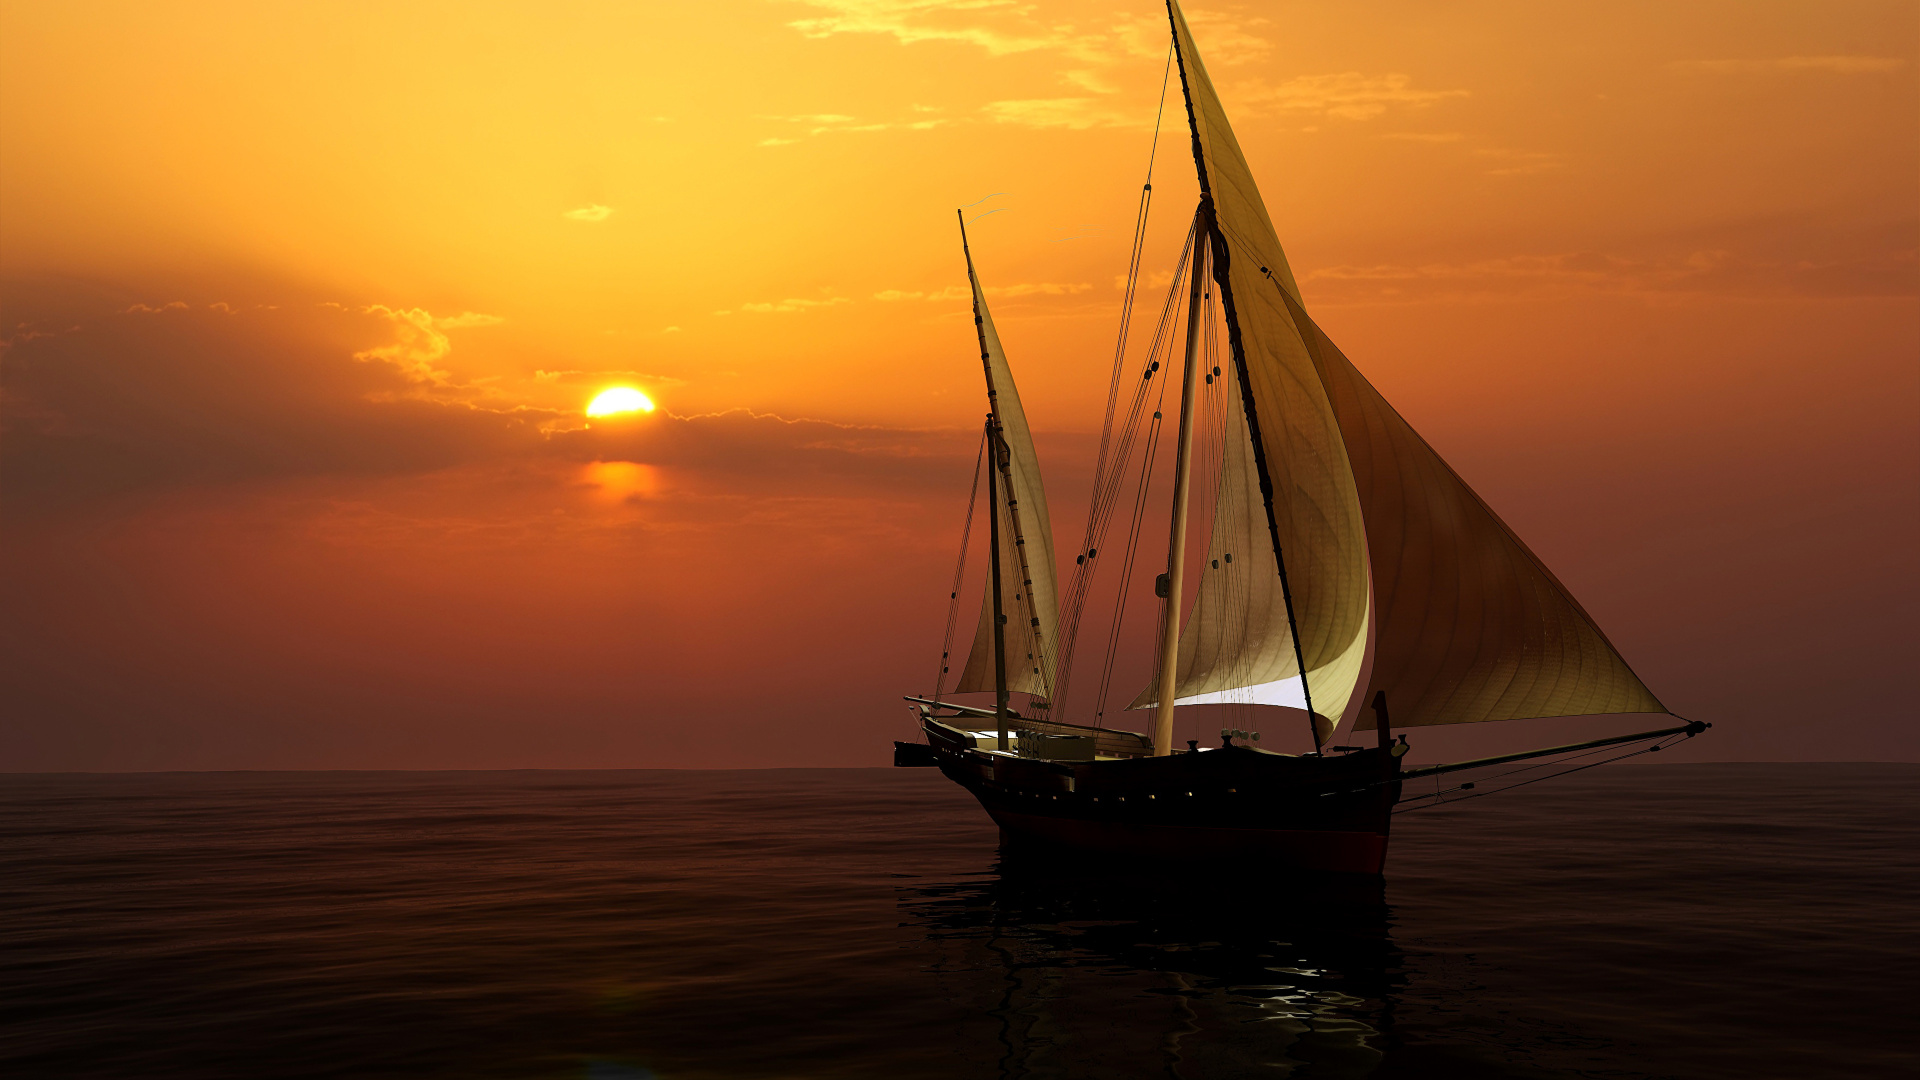 Silhouette of Boat on Sea During Sunset. Wallpaper in 1920x1080 Resolution